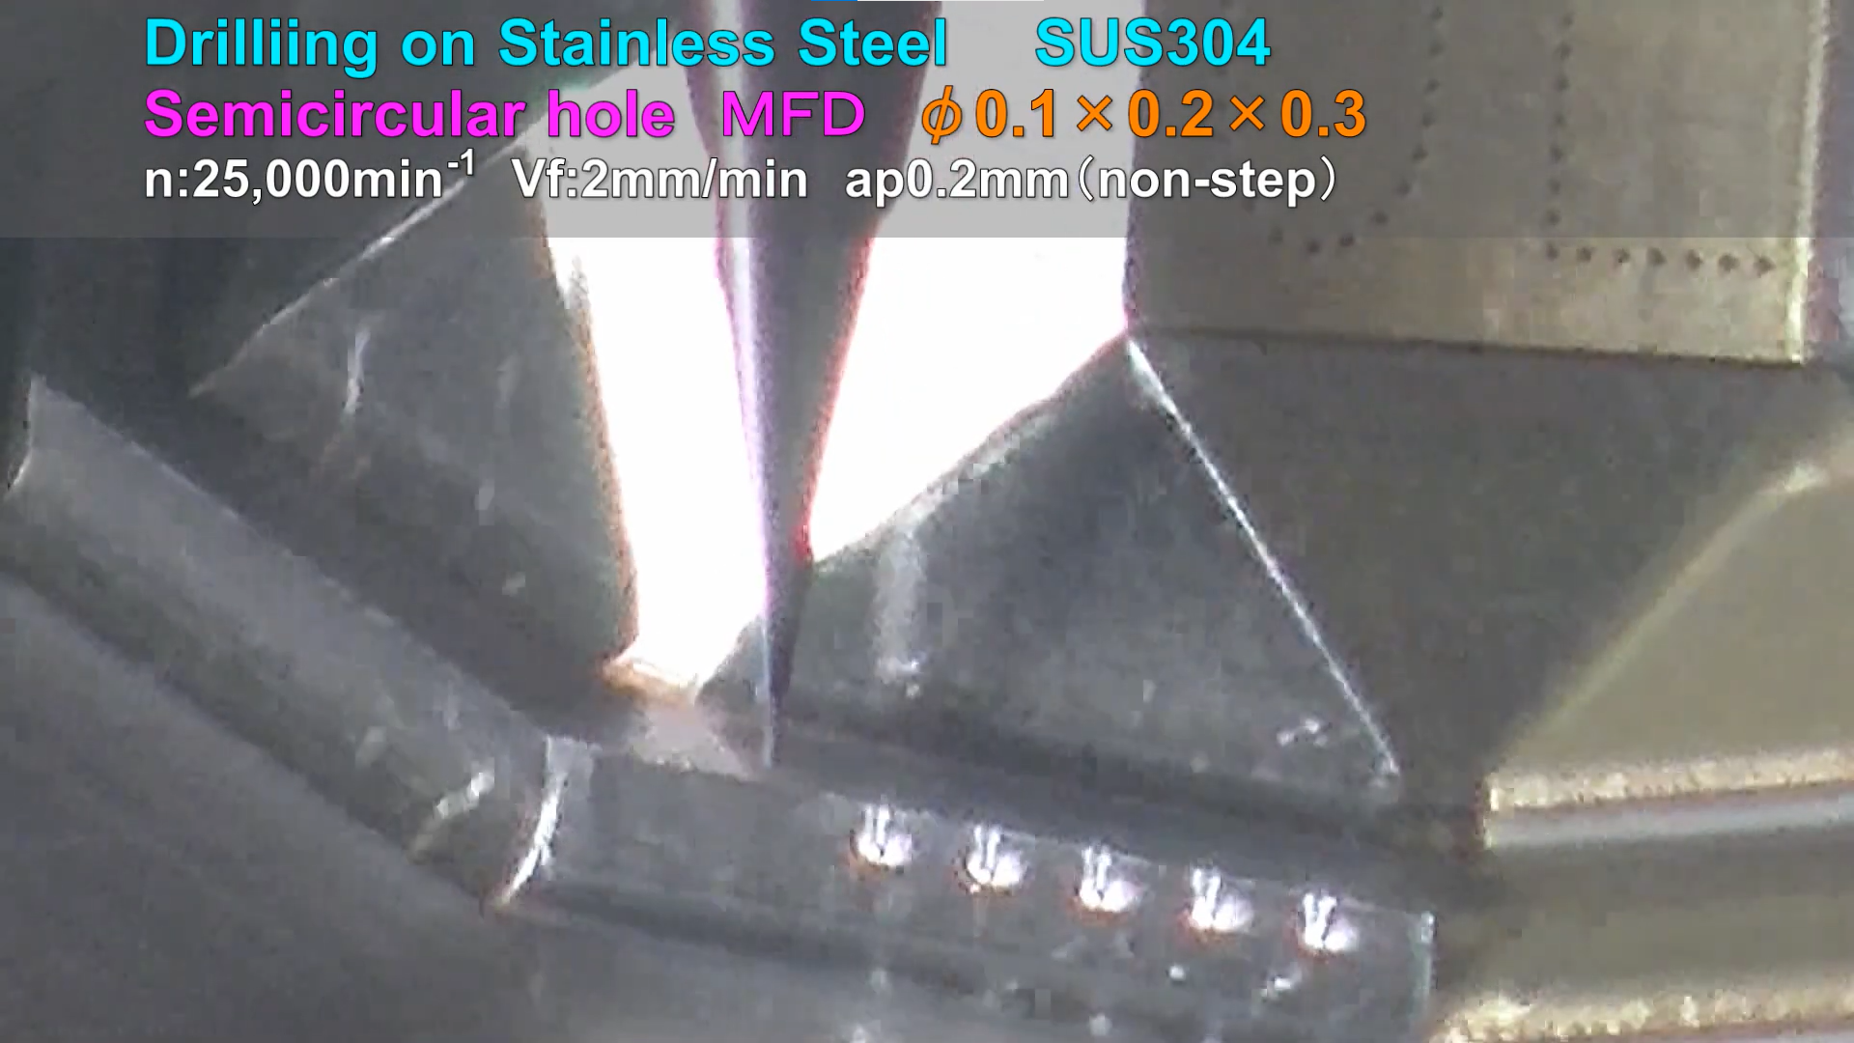 Drilling on Stainless Steel